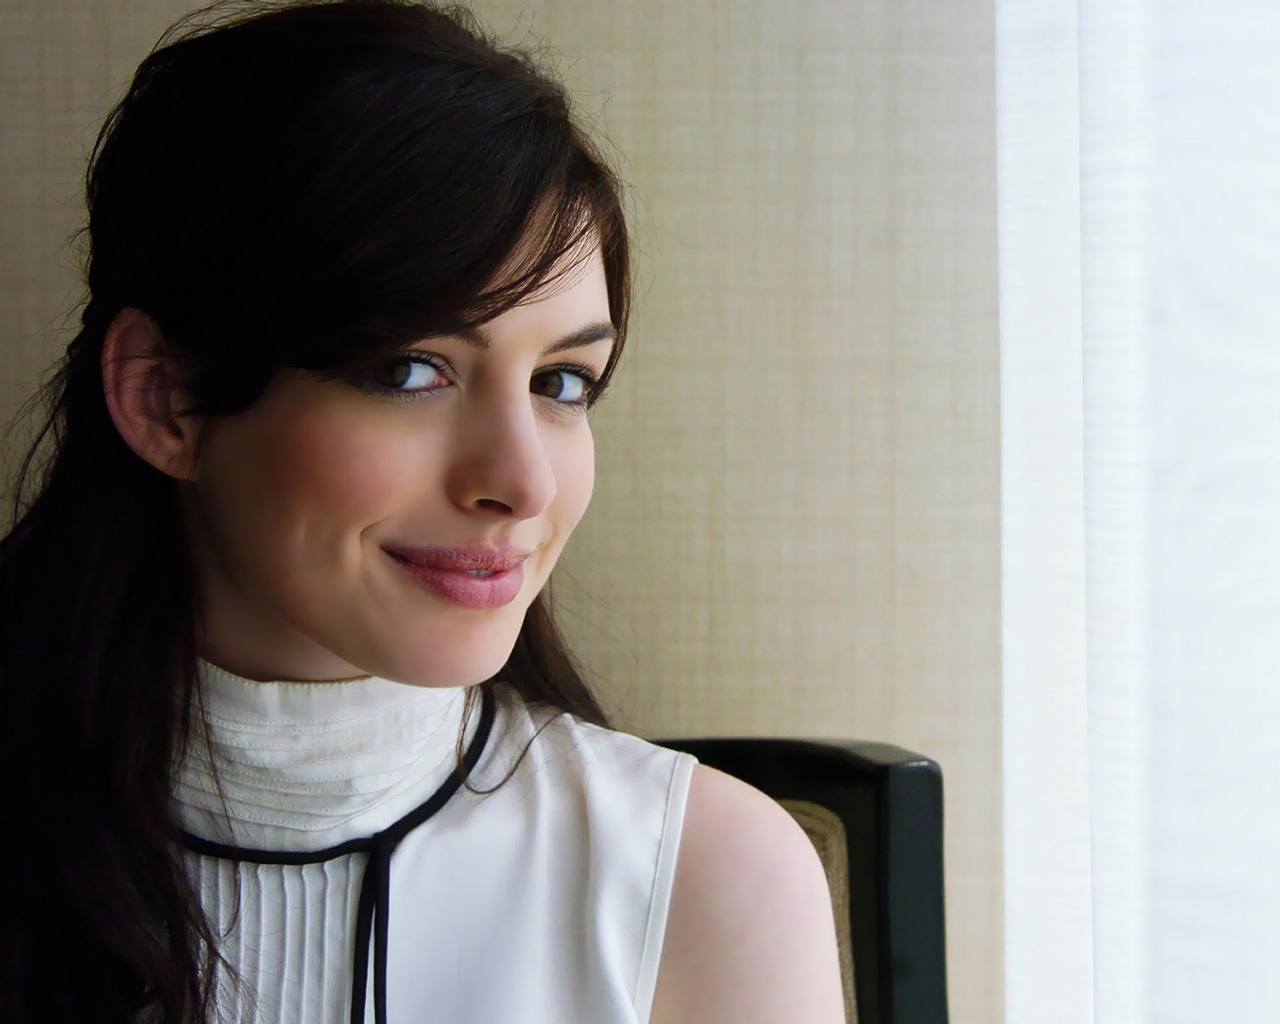 Anne Hathaway Cute for 1280 x 1024 resolution